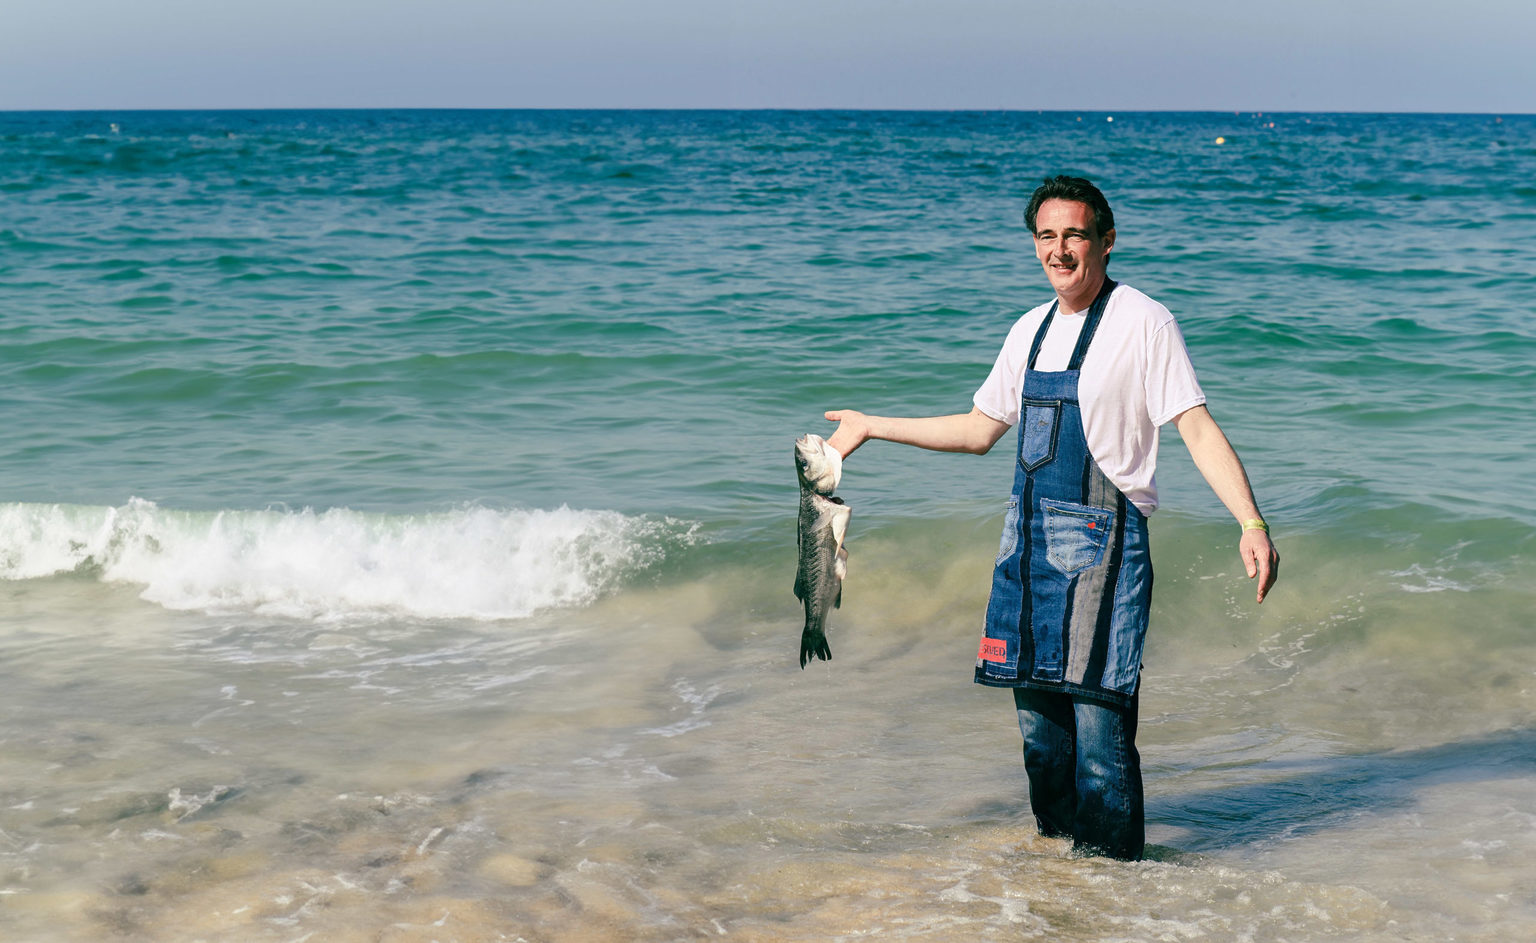 Stephane Delourme, previous head chef for Rick Stein in Cornwall, at Swinton Estate for Seafood Week